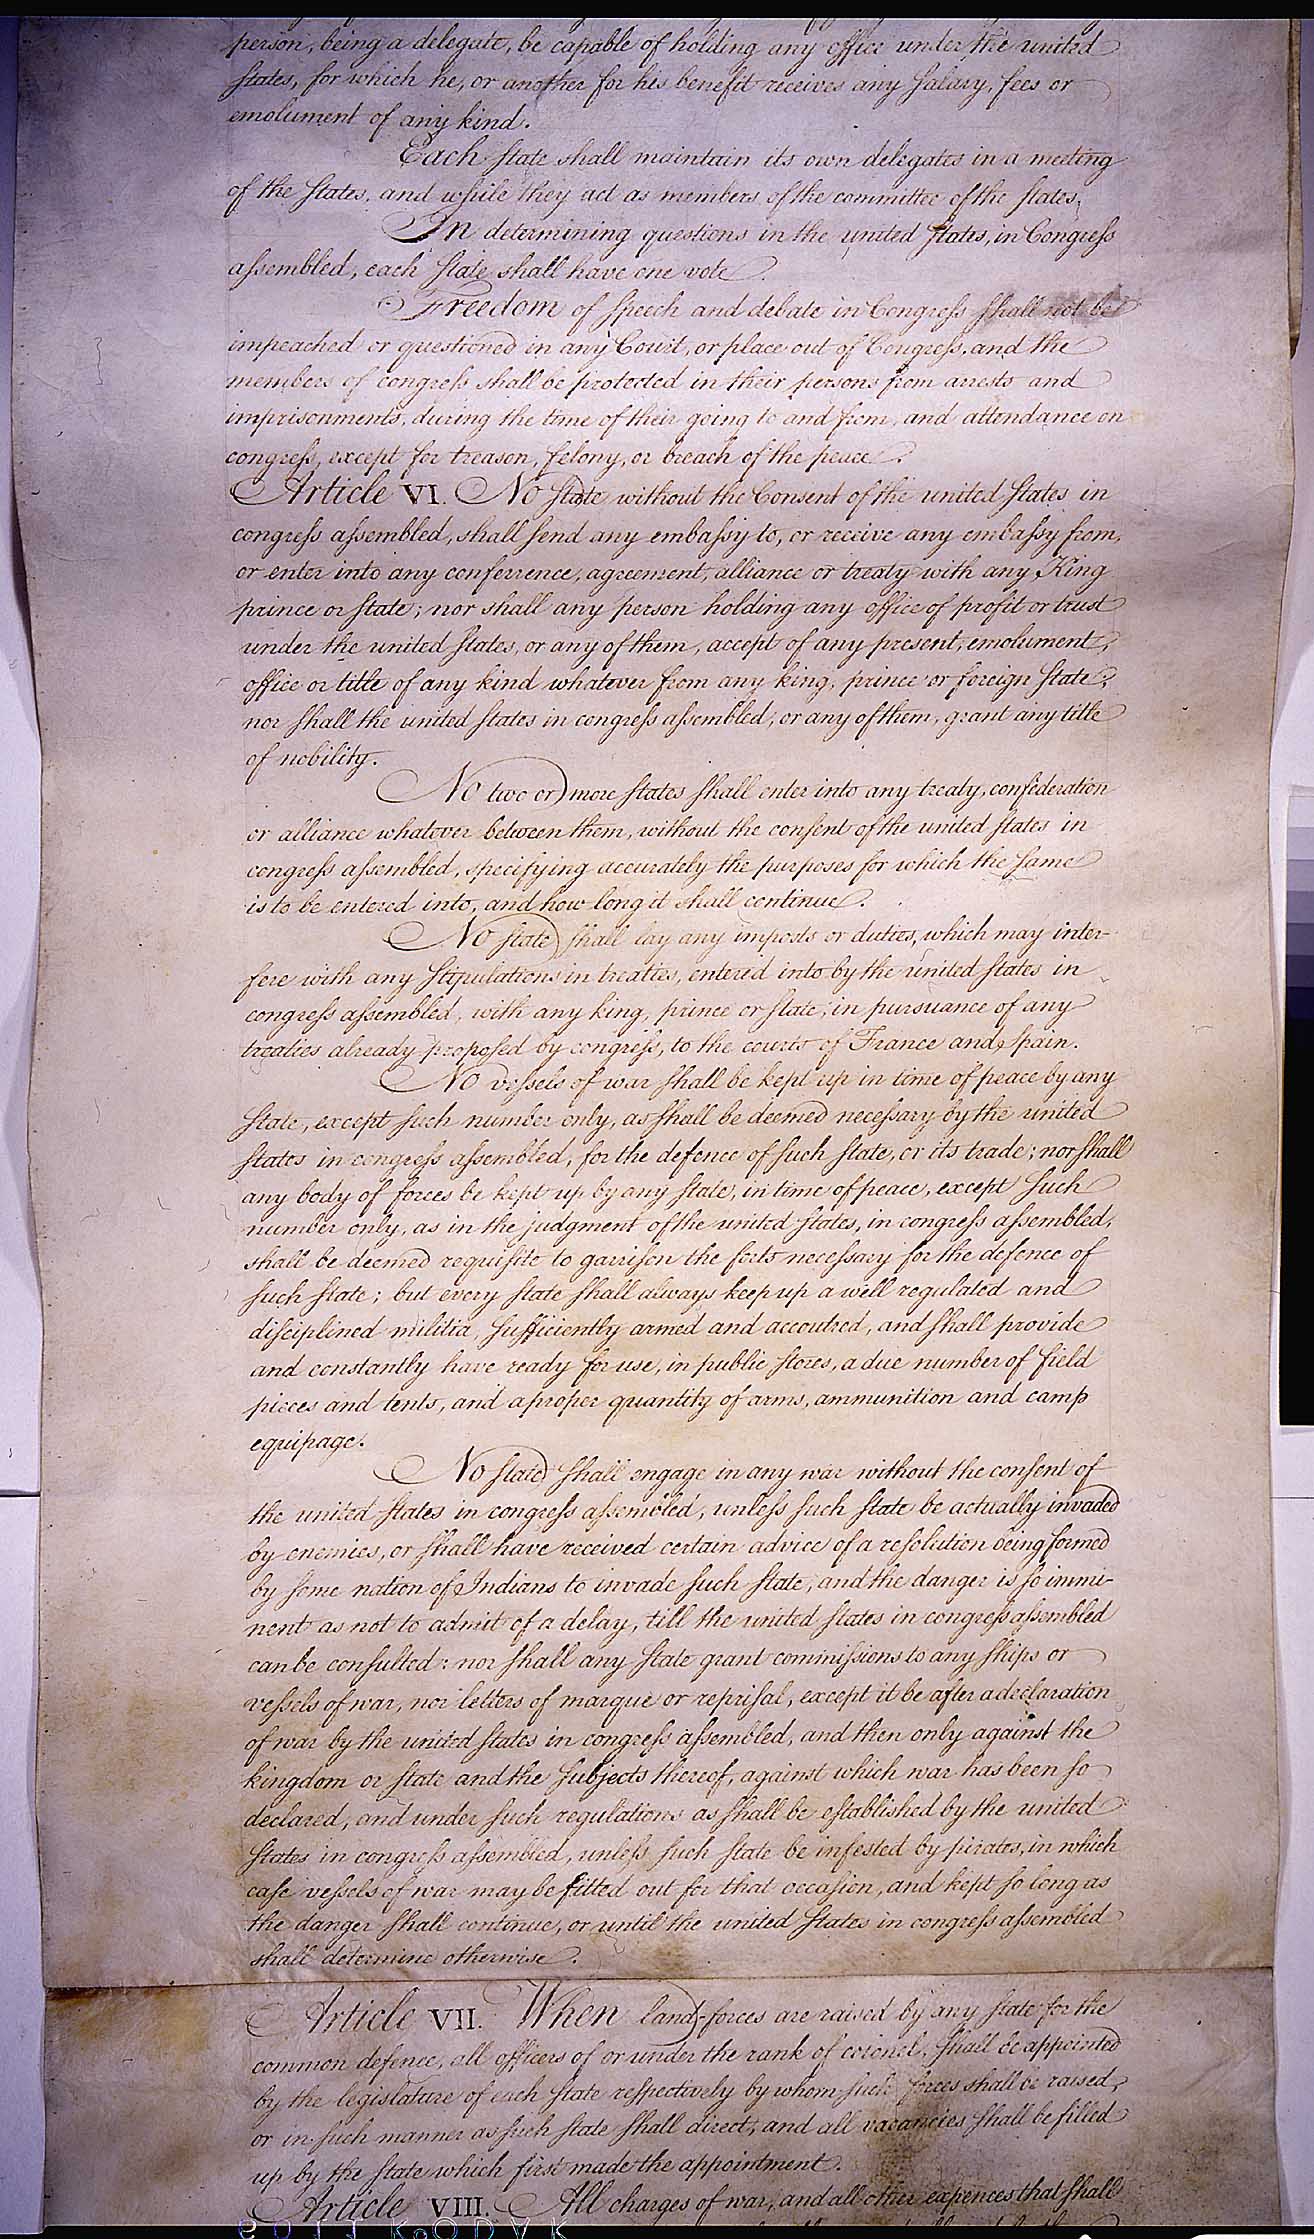 Articles of Confederation (Page 2)